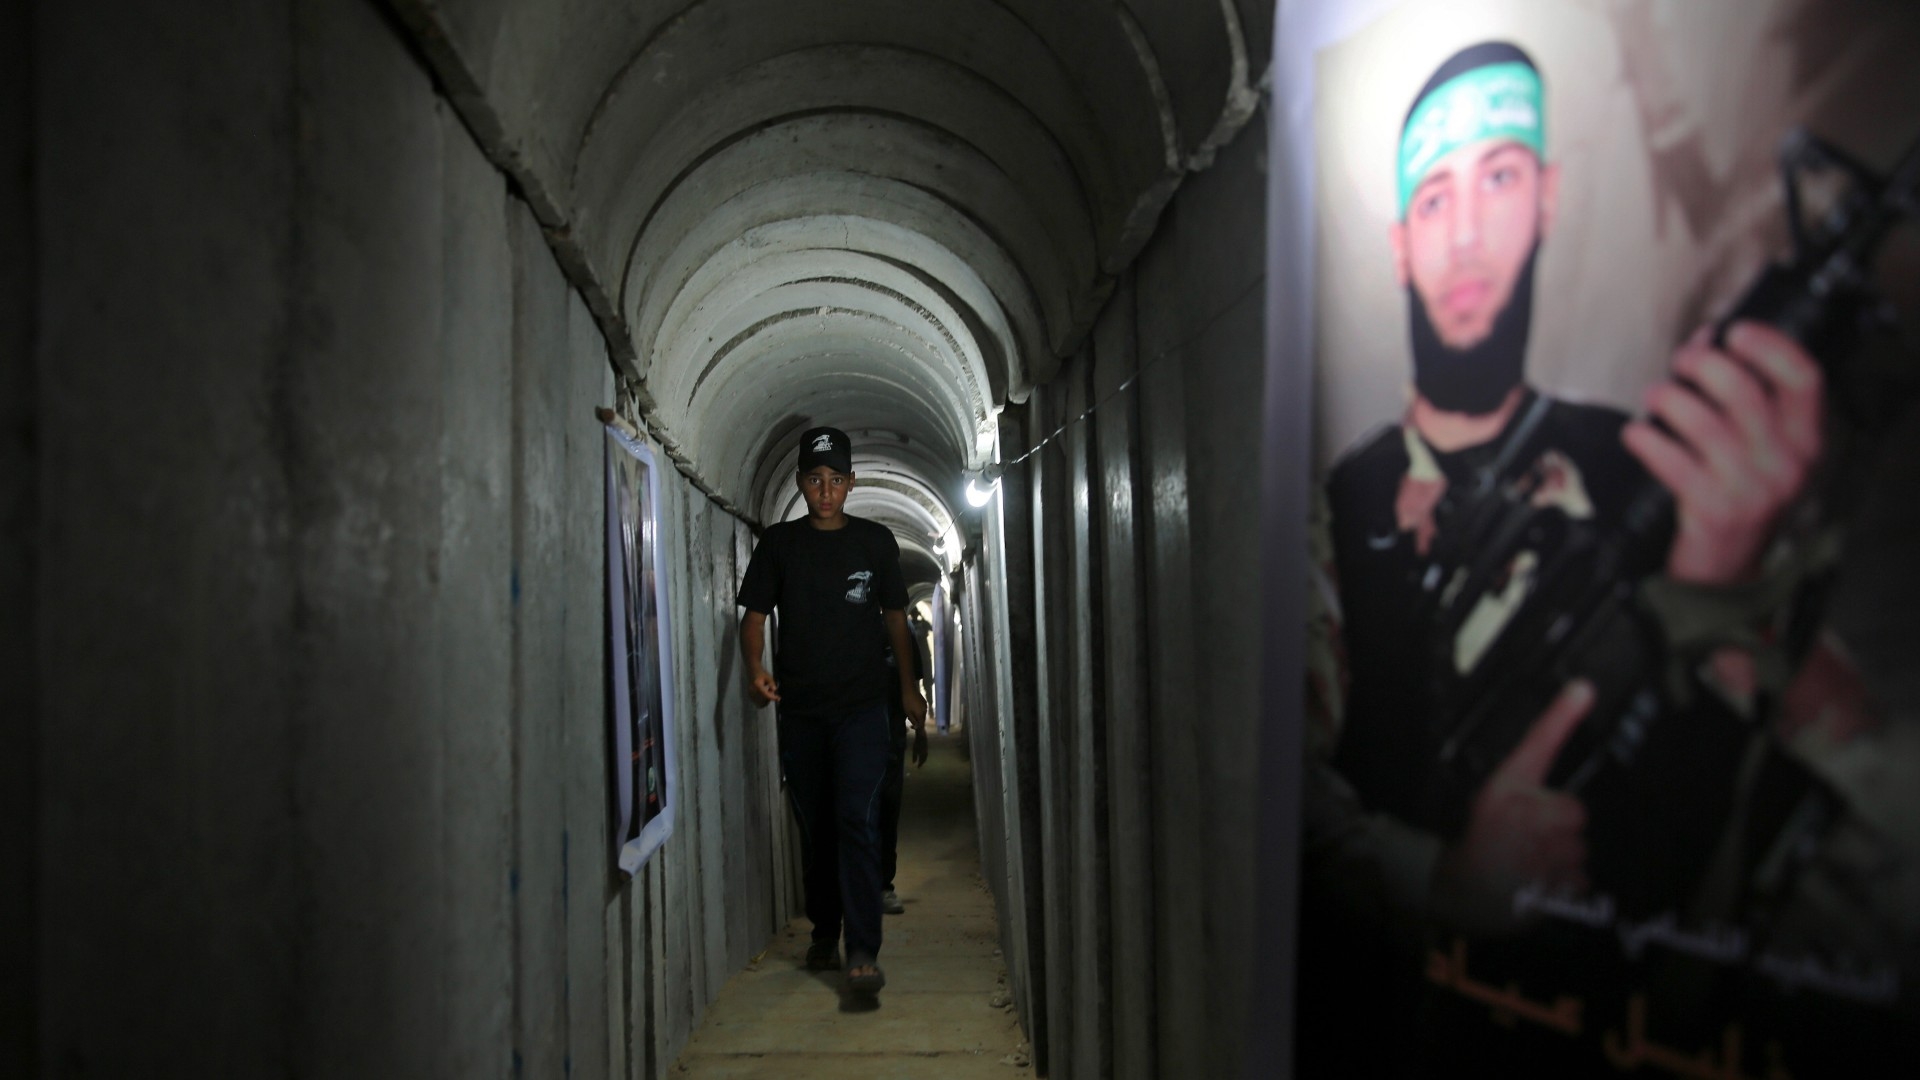 A Palestinian youth walks inside a tunnel used for Hamas military exercises in Gaza City in 2016 (File photo/AP)